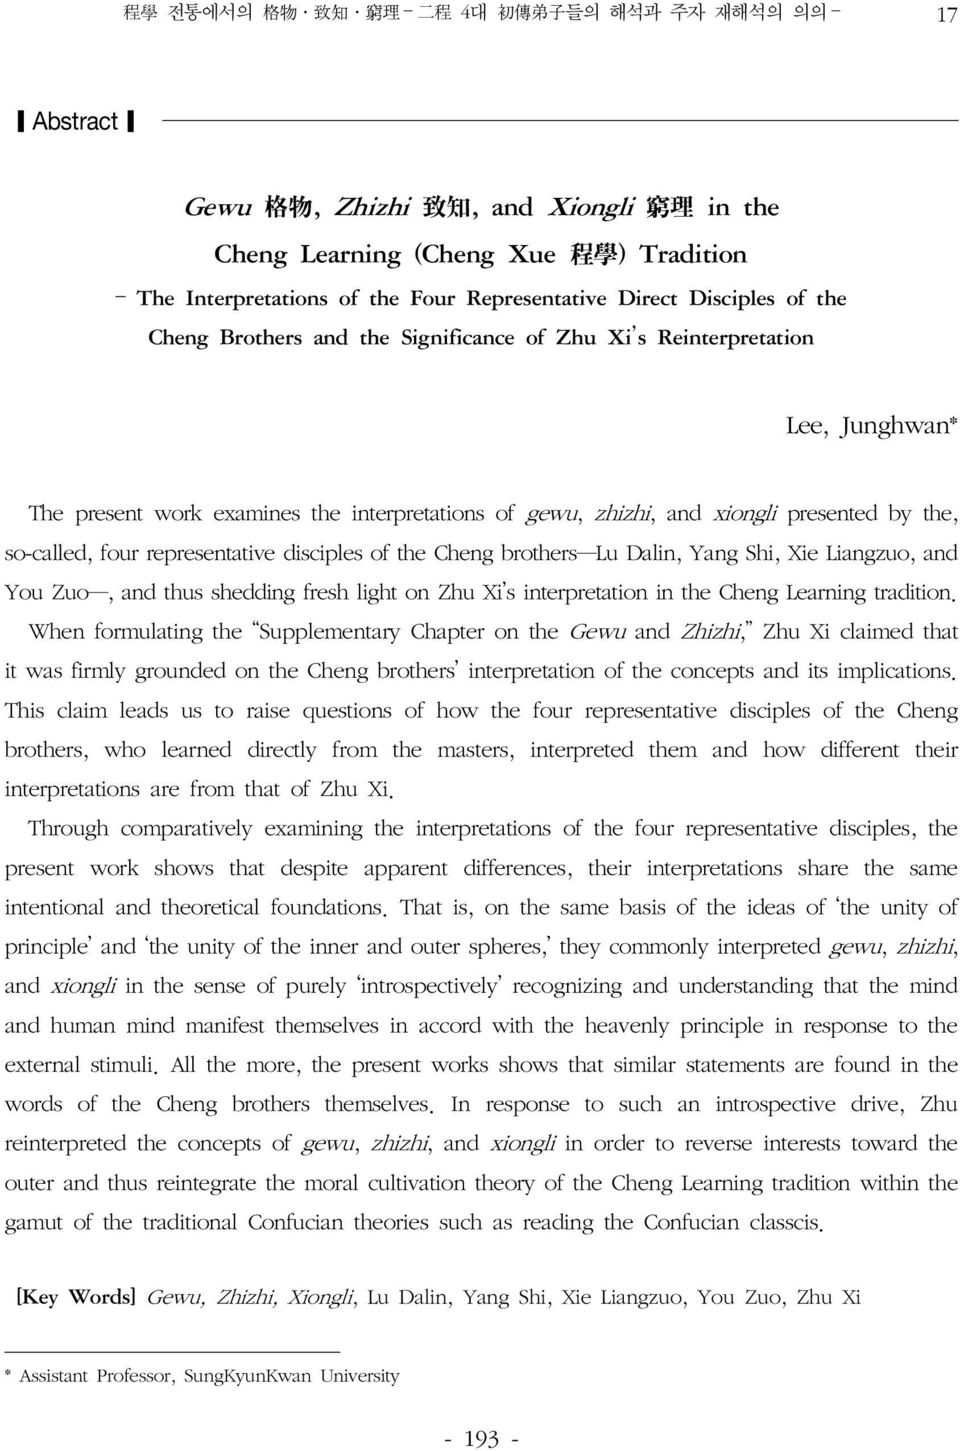 presented by the, so-called, four representative disciples of the Cheng brothers Lu Dalin, Yang Shi, Xie Liangzuo, and You Zuo, and thus shedding fresh light on Zhu Xi s interpretation in the Cheng